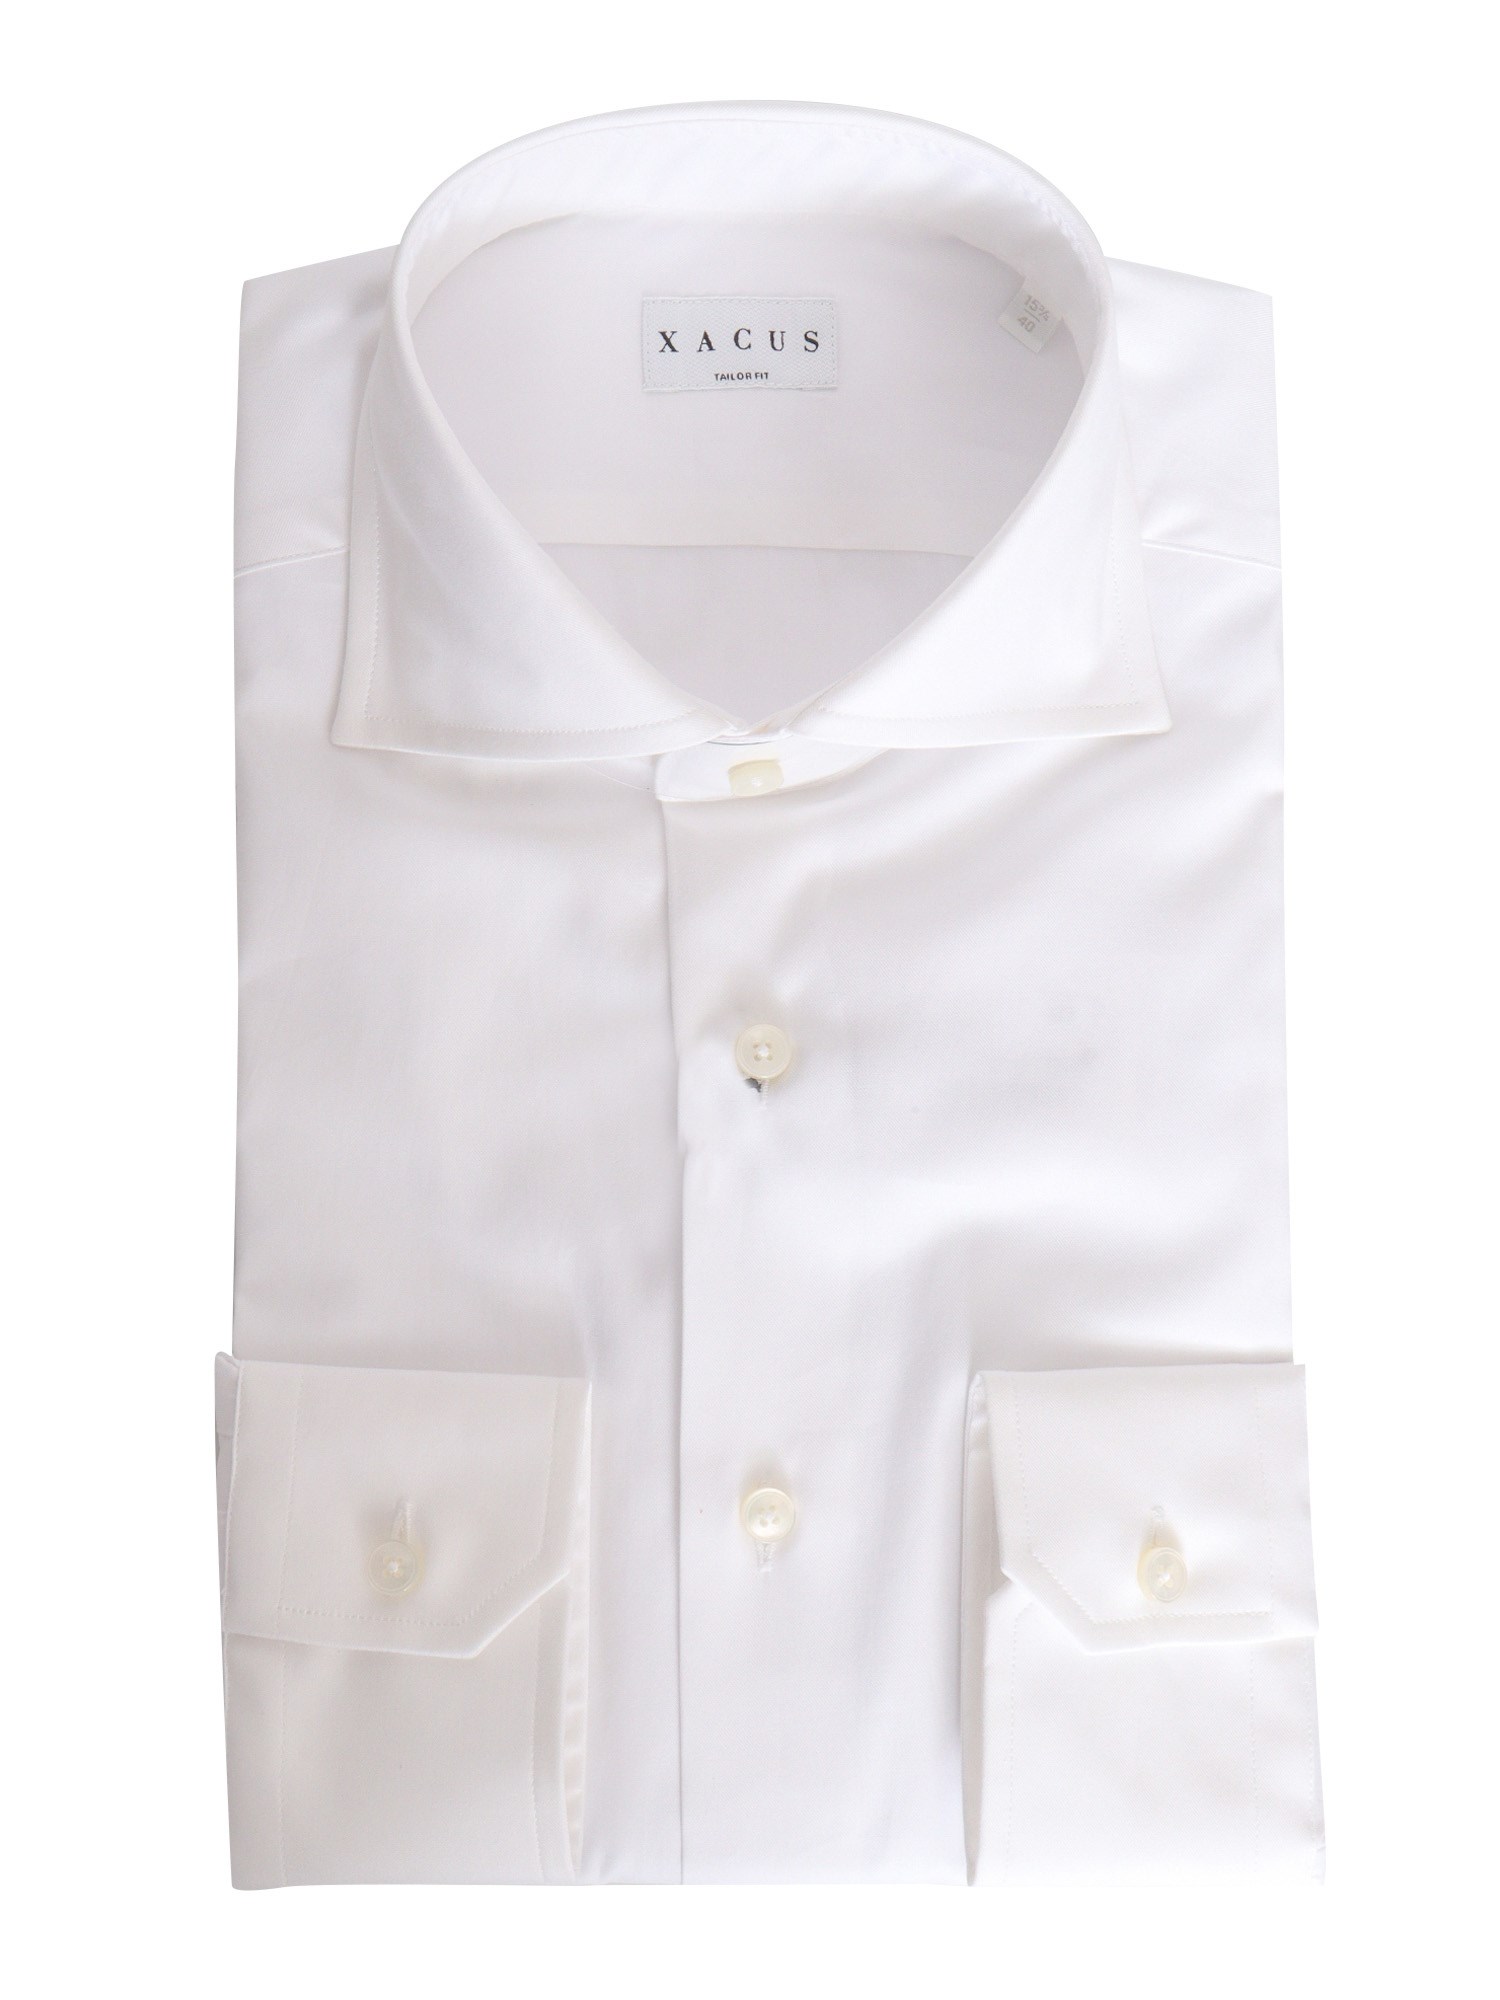 Xacus White Shirt With Pockets In Blue